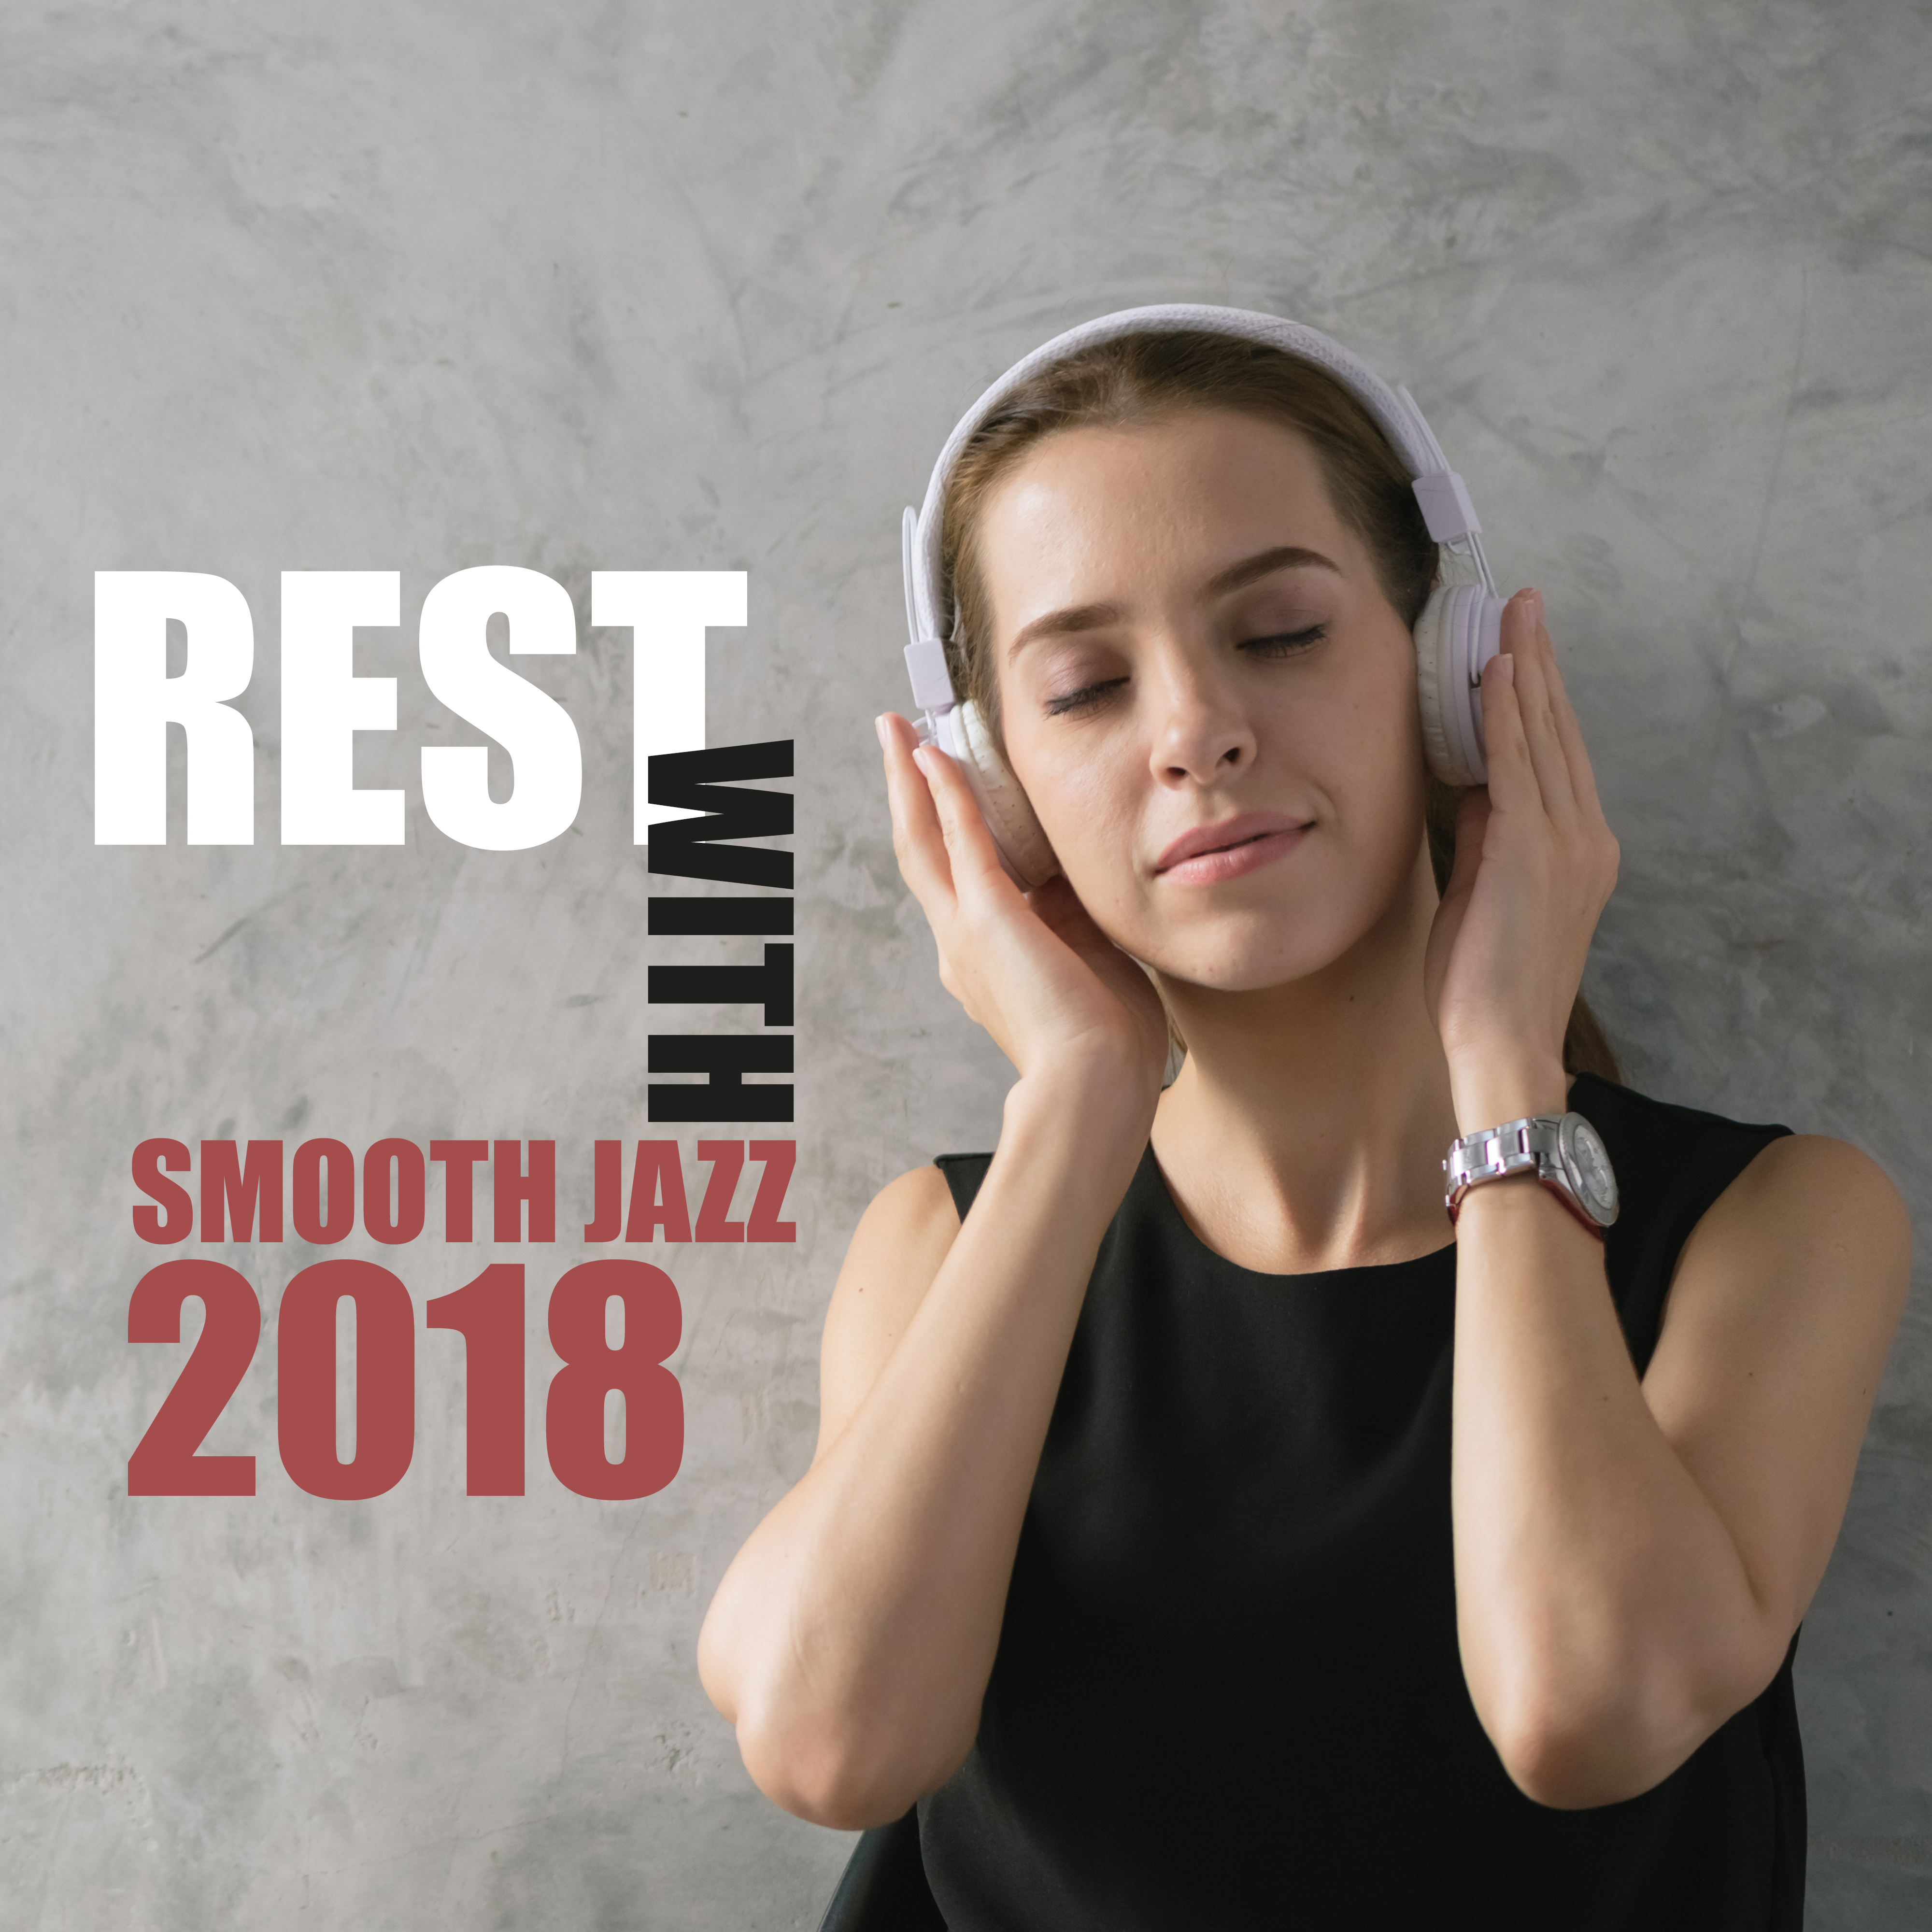 Rest with Smooth Jazz 2018